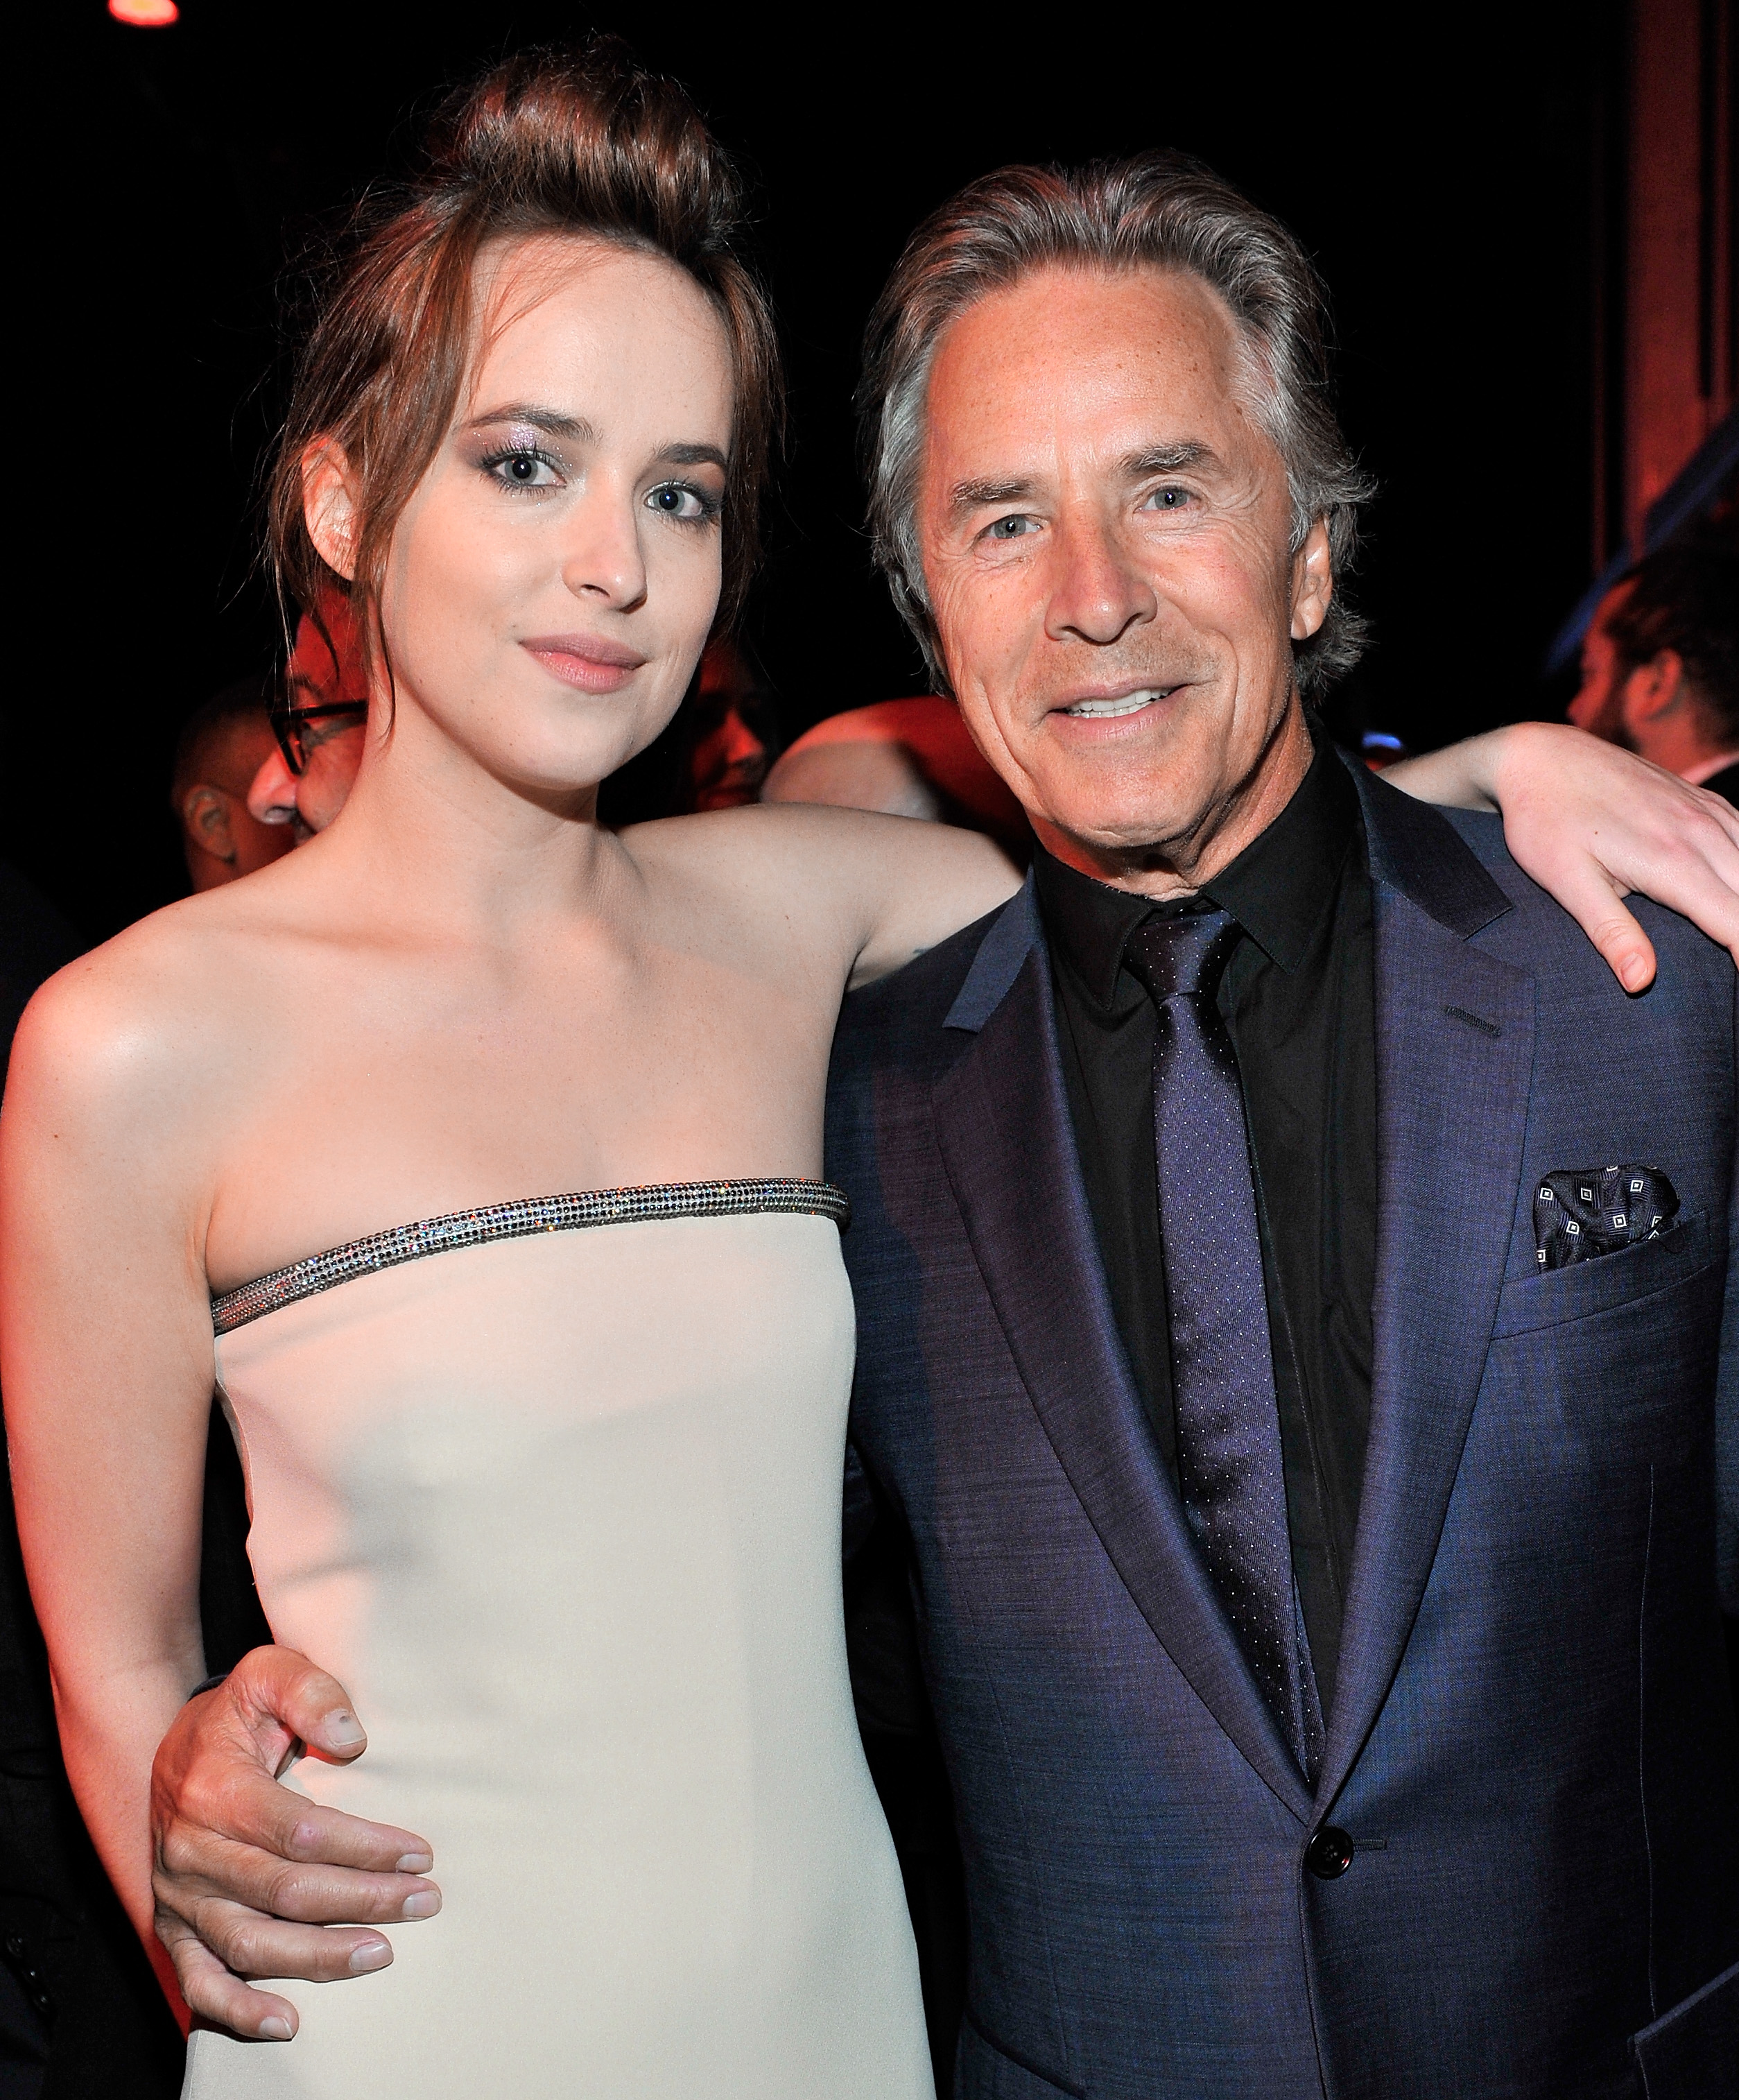 Dakota and Don Johnson at the LACMA Art + Film Gala in Los Angeles, California on November 1, 2014 | Source: Getty Images